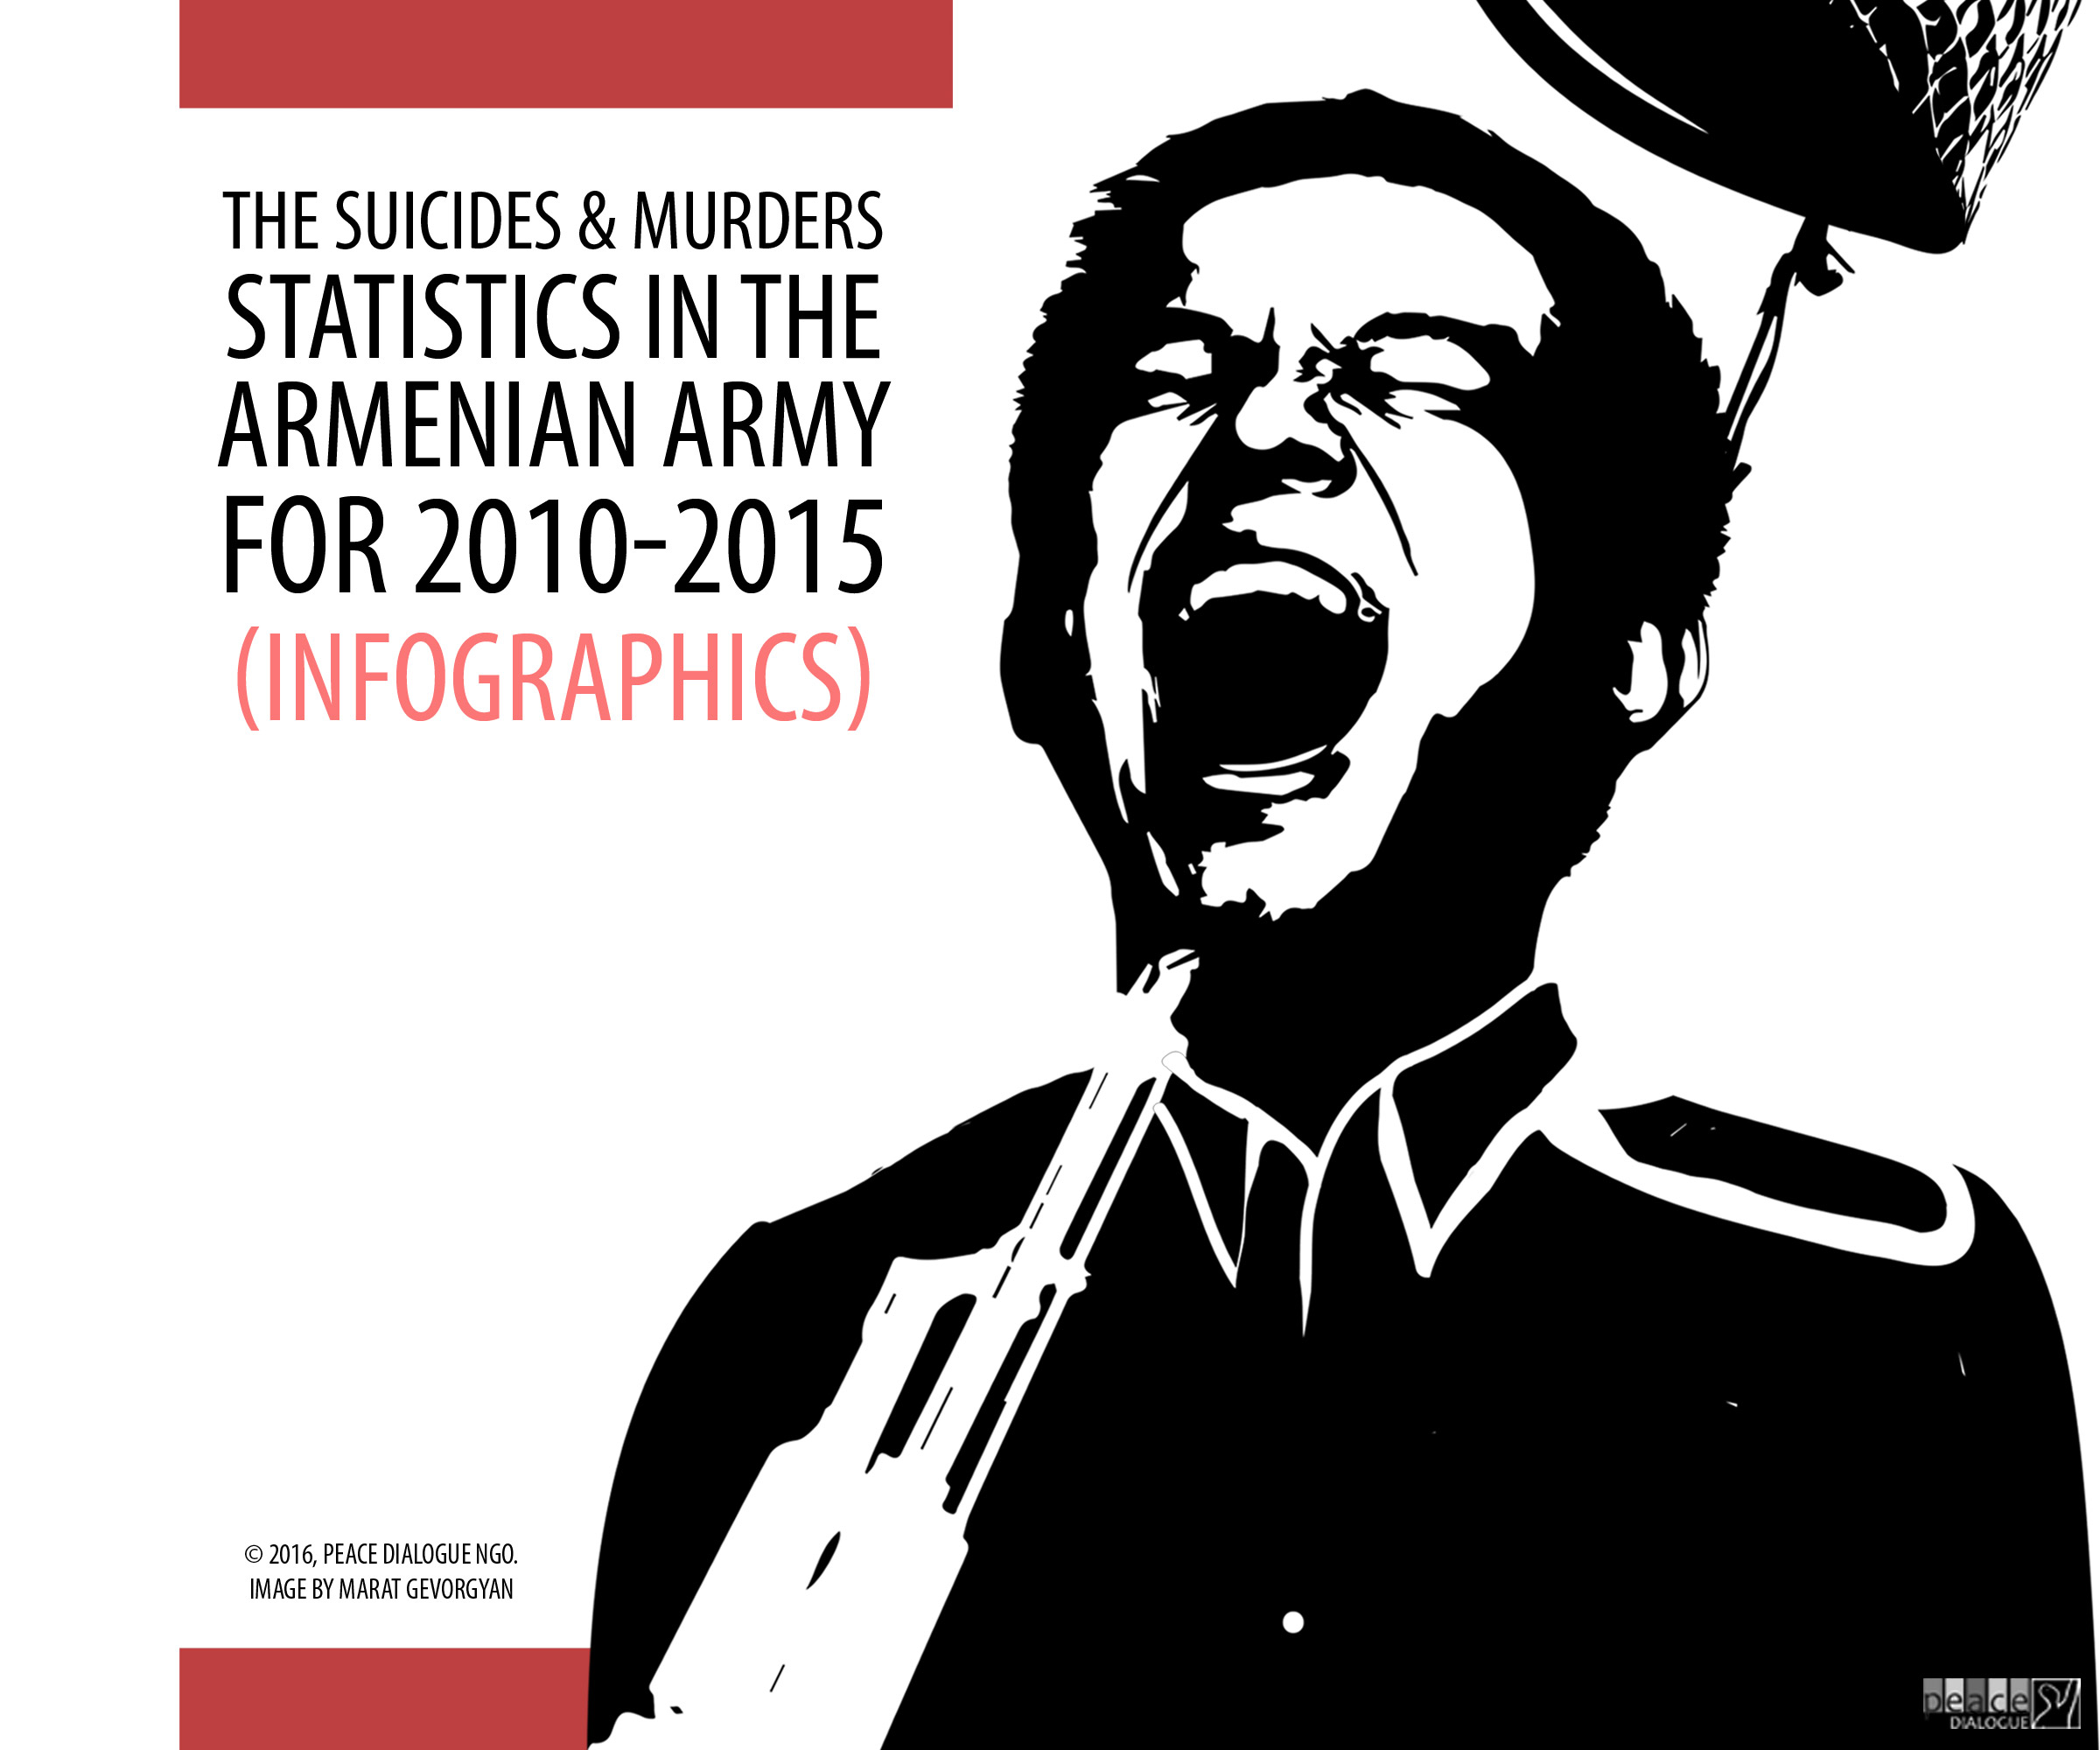 The Suicides and Murders Statistics in the Armenian Army (2010-2015)